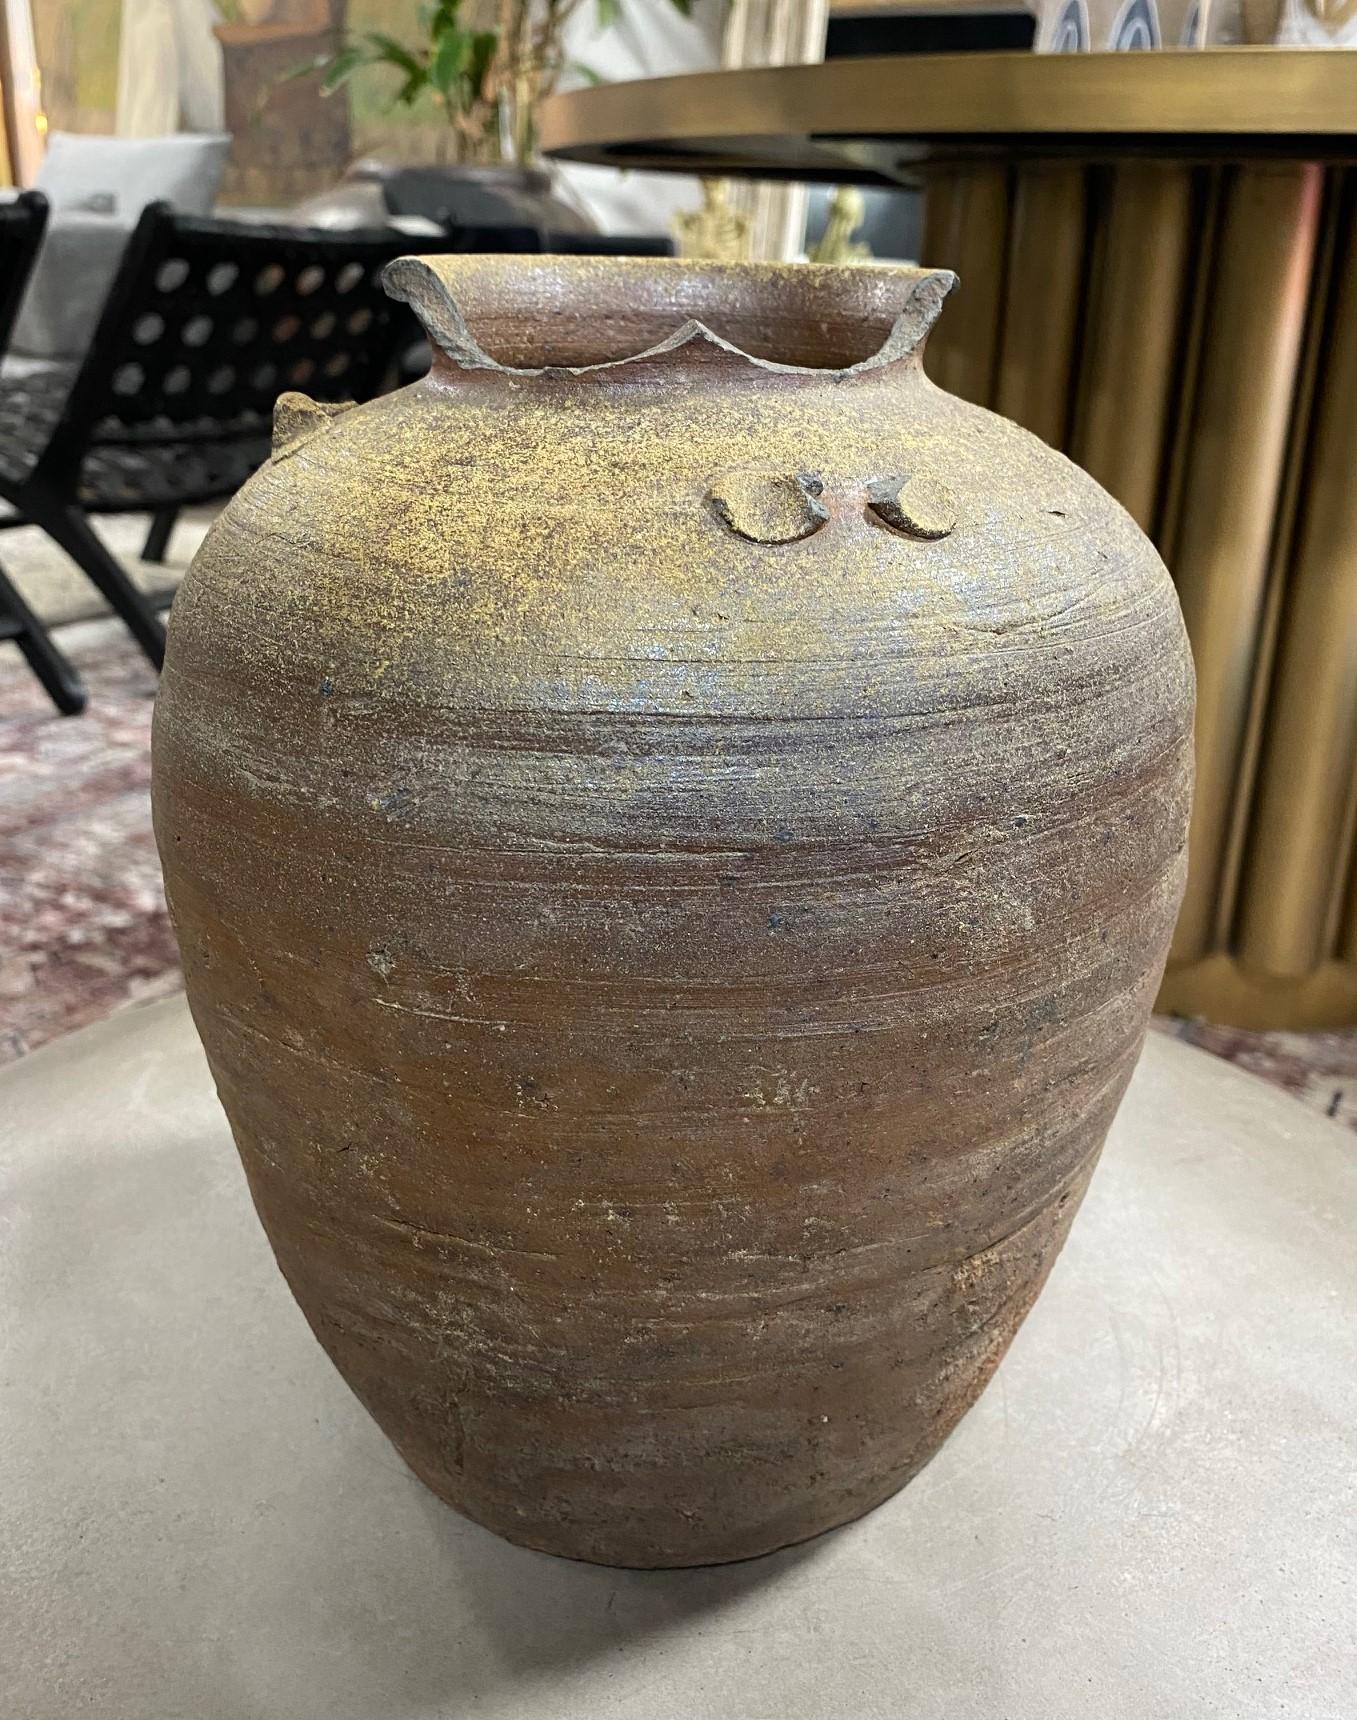 An absolutely stunning Bizen ware stoneware vase/jar/vessel - produced sometime during the late Momoyama period (1568-1600) / Early Edo Period (1603-1867). Bizen yaki ware is a type of Japanese pottery traditionally from the Bizen province,